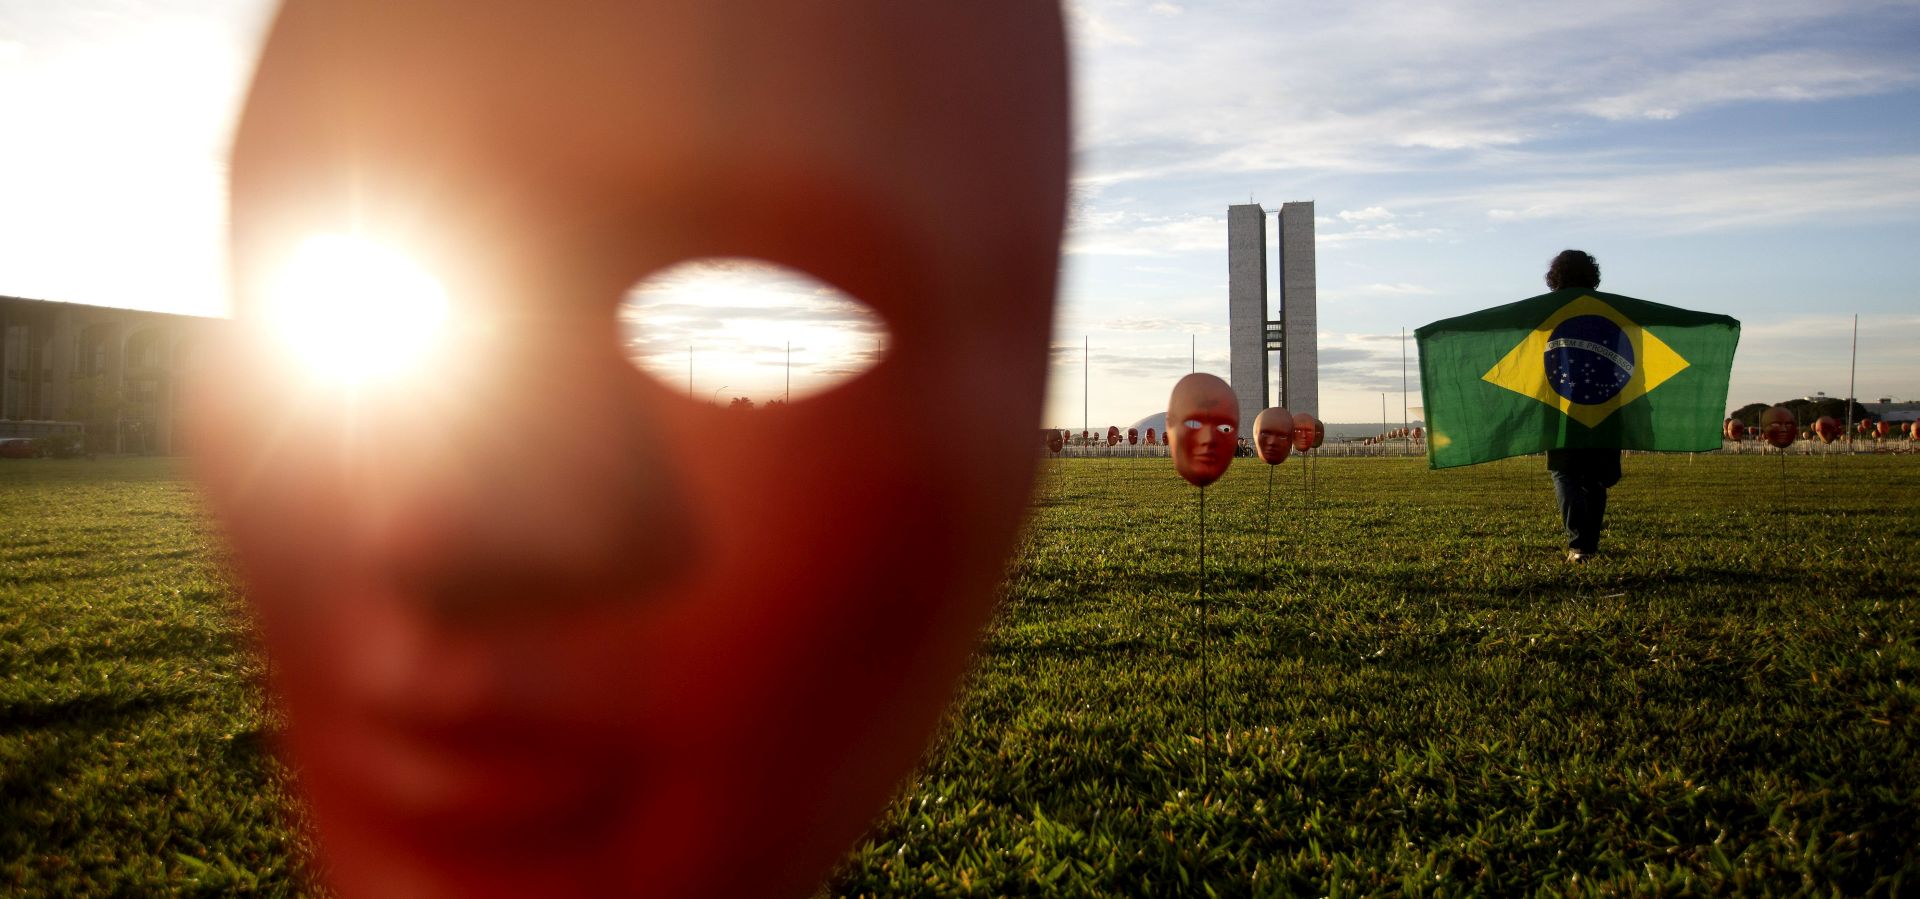 epa05984305 Members of Brazilia NGO 'Rio de la Paz' put masks on sticks representing the federal deputies, Senators and President Temer, outside the Brazilian Congress building in Brasilia, Brazil, 23 May 2017. Protestors deployed on the grass 595 white and red masks representing President Temer's Government members and as a protest against the corruption in it.  EPA/Joédson Alves